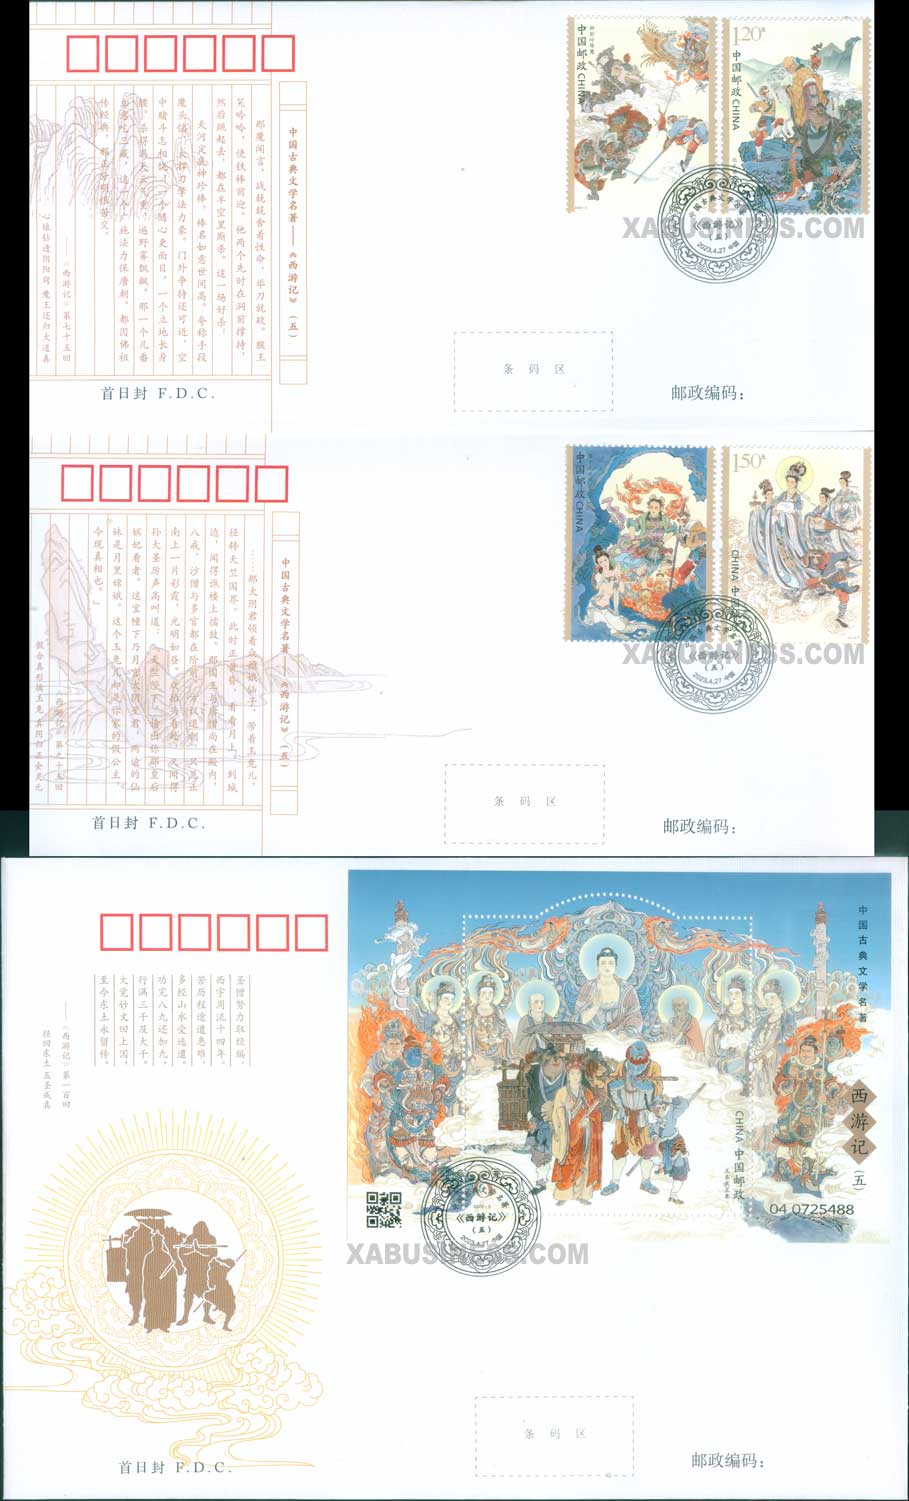 Journey to the West (5) - One of China's Famous Classical Literary Works (FDC)